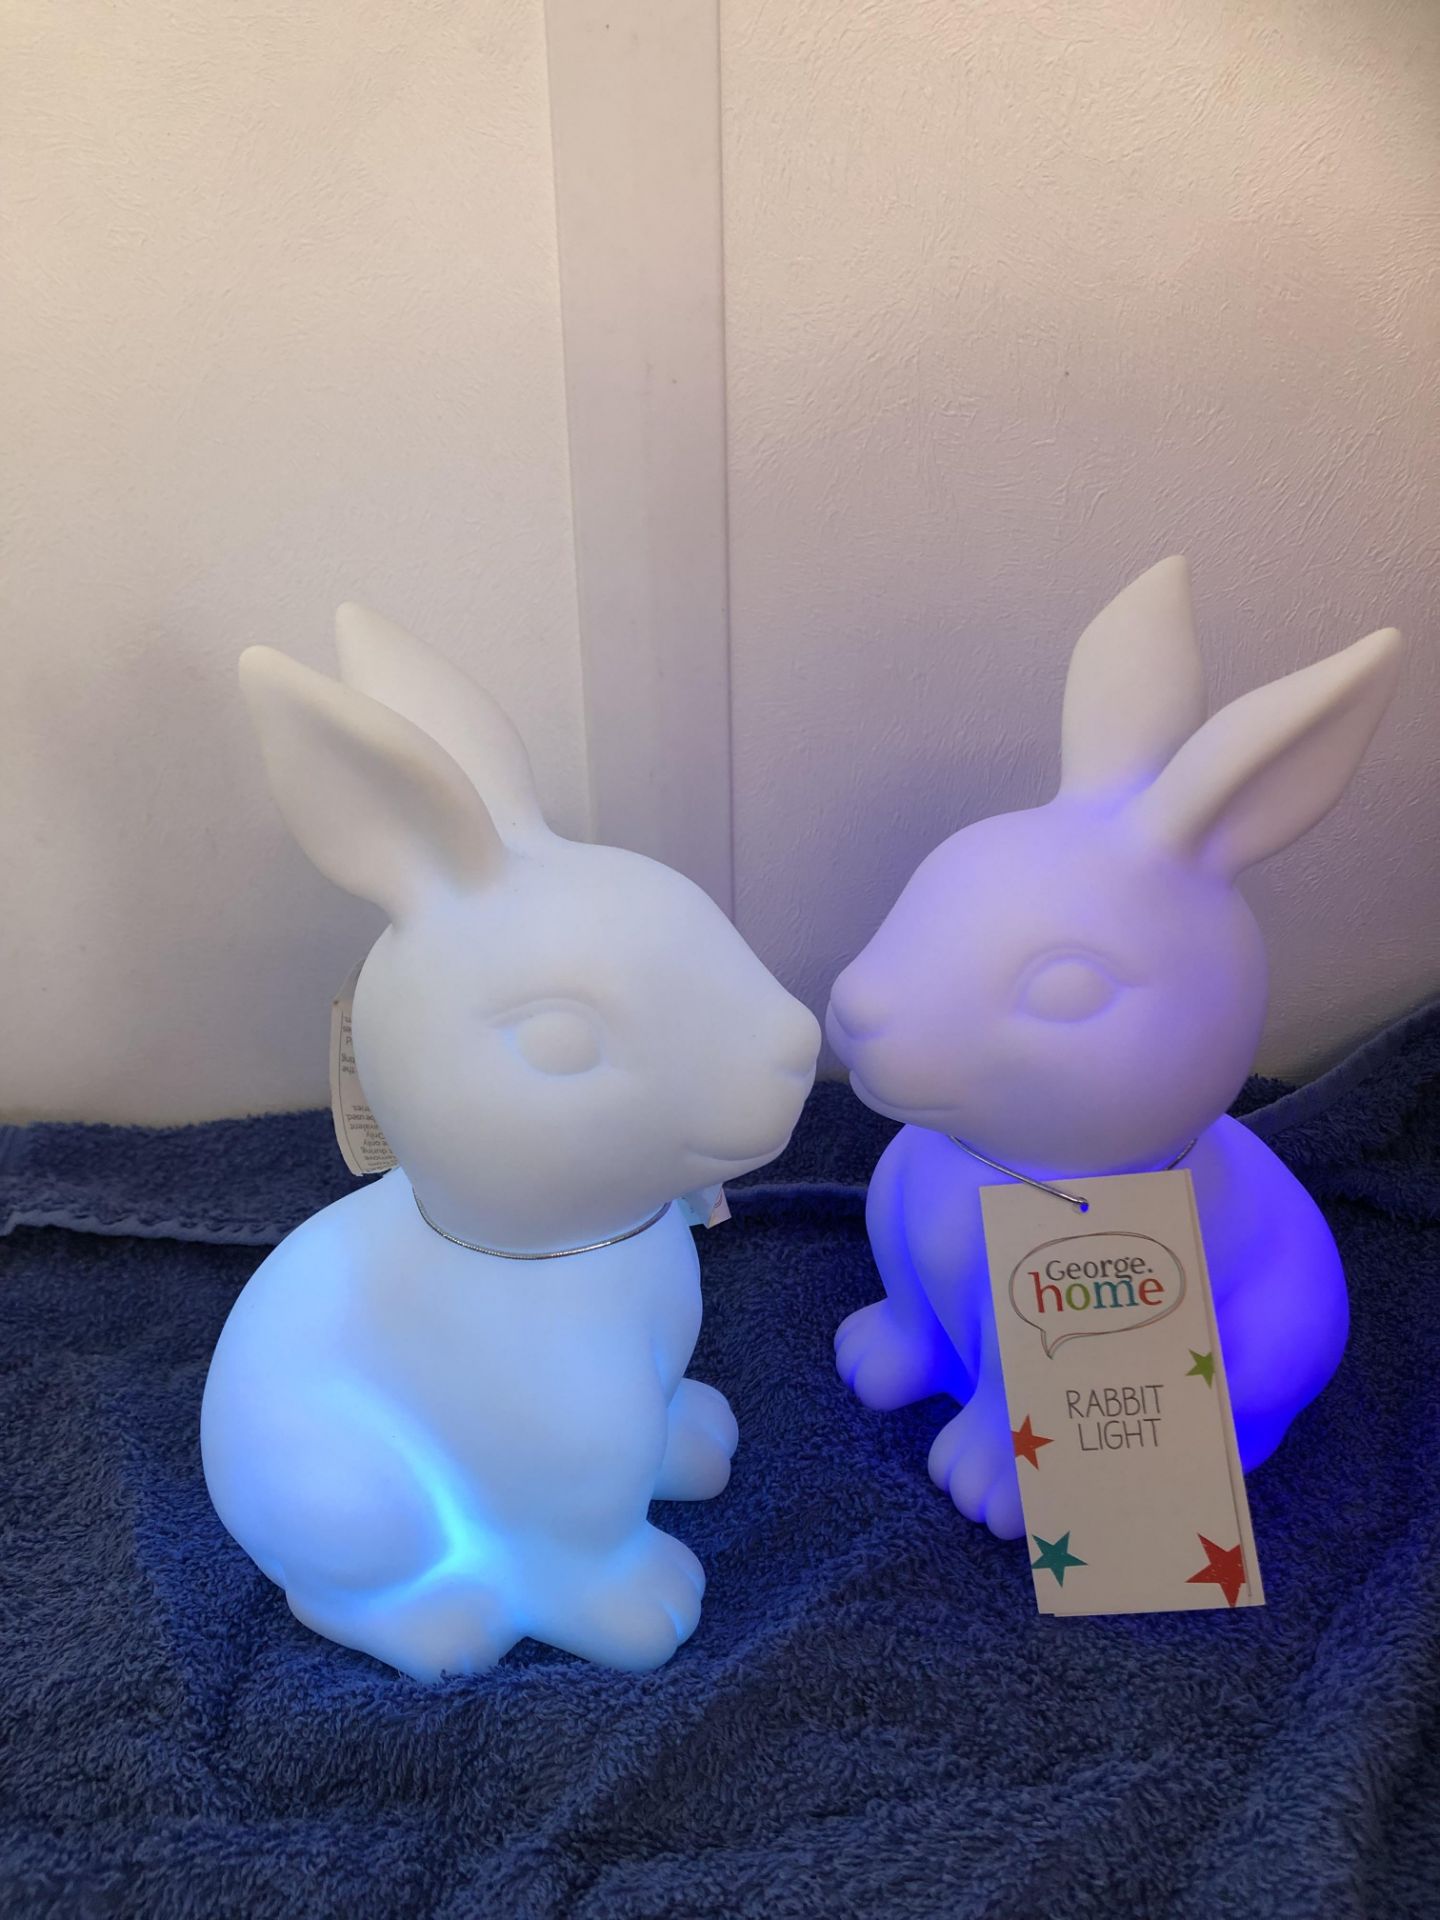 6 BOXES X 2 RABBIT LIGHTS COLOUR CHANGING BATTERY OPERATED (TOTAL QUANTITY 12) - Image 2 of 3